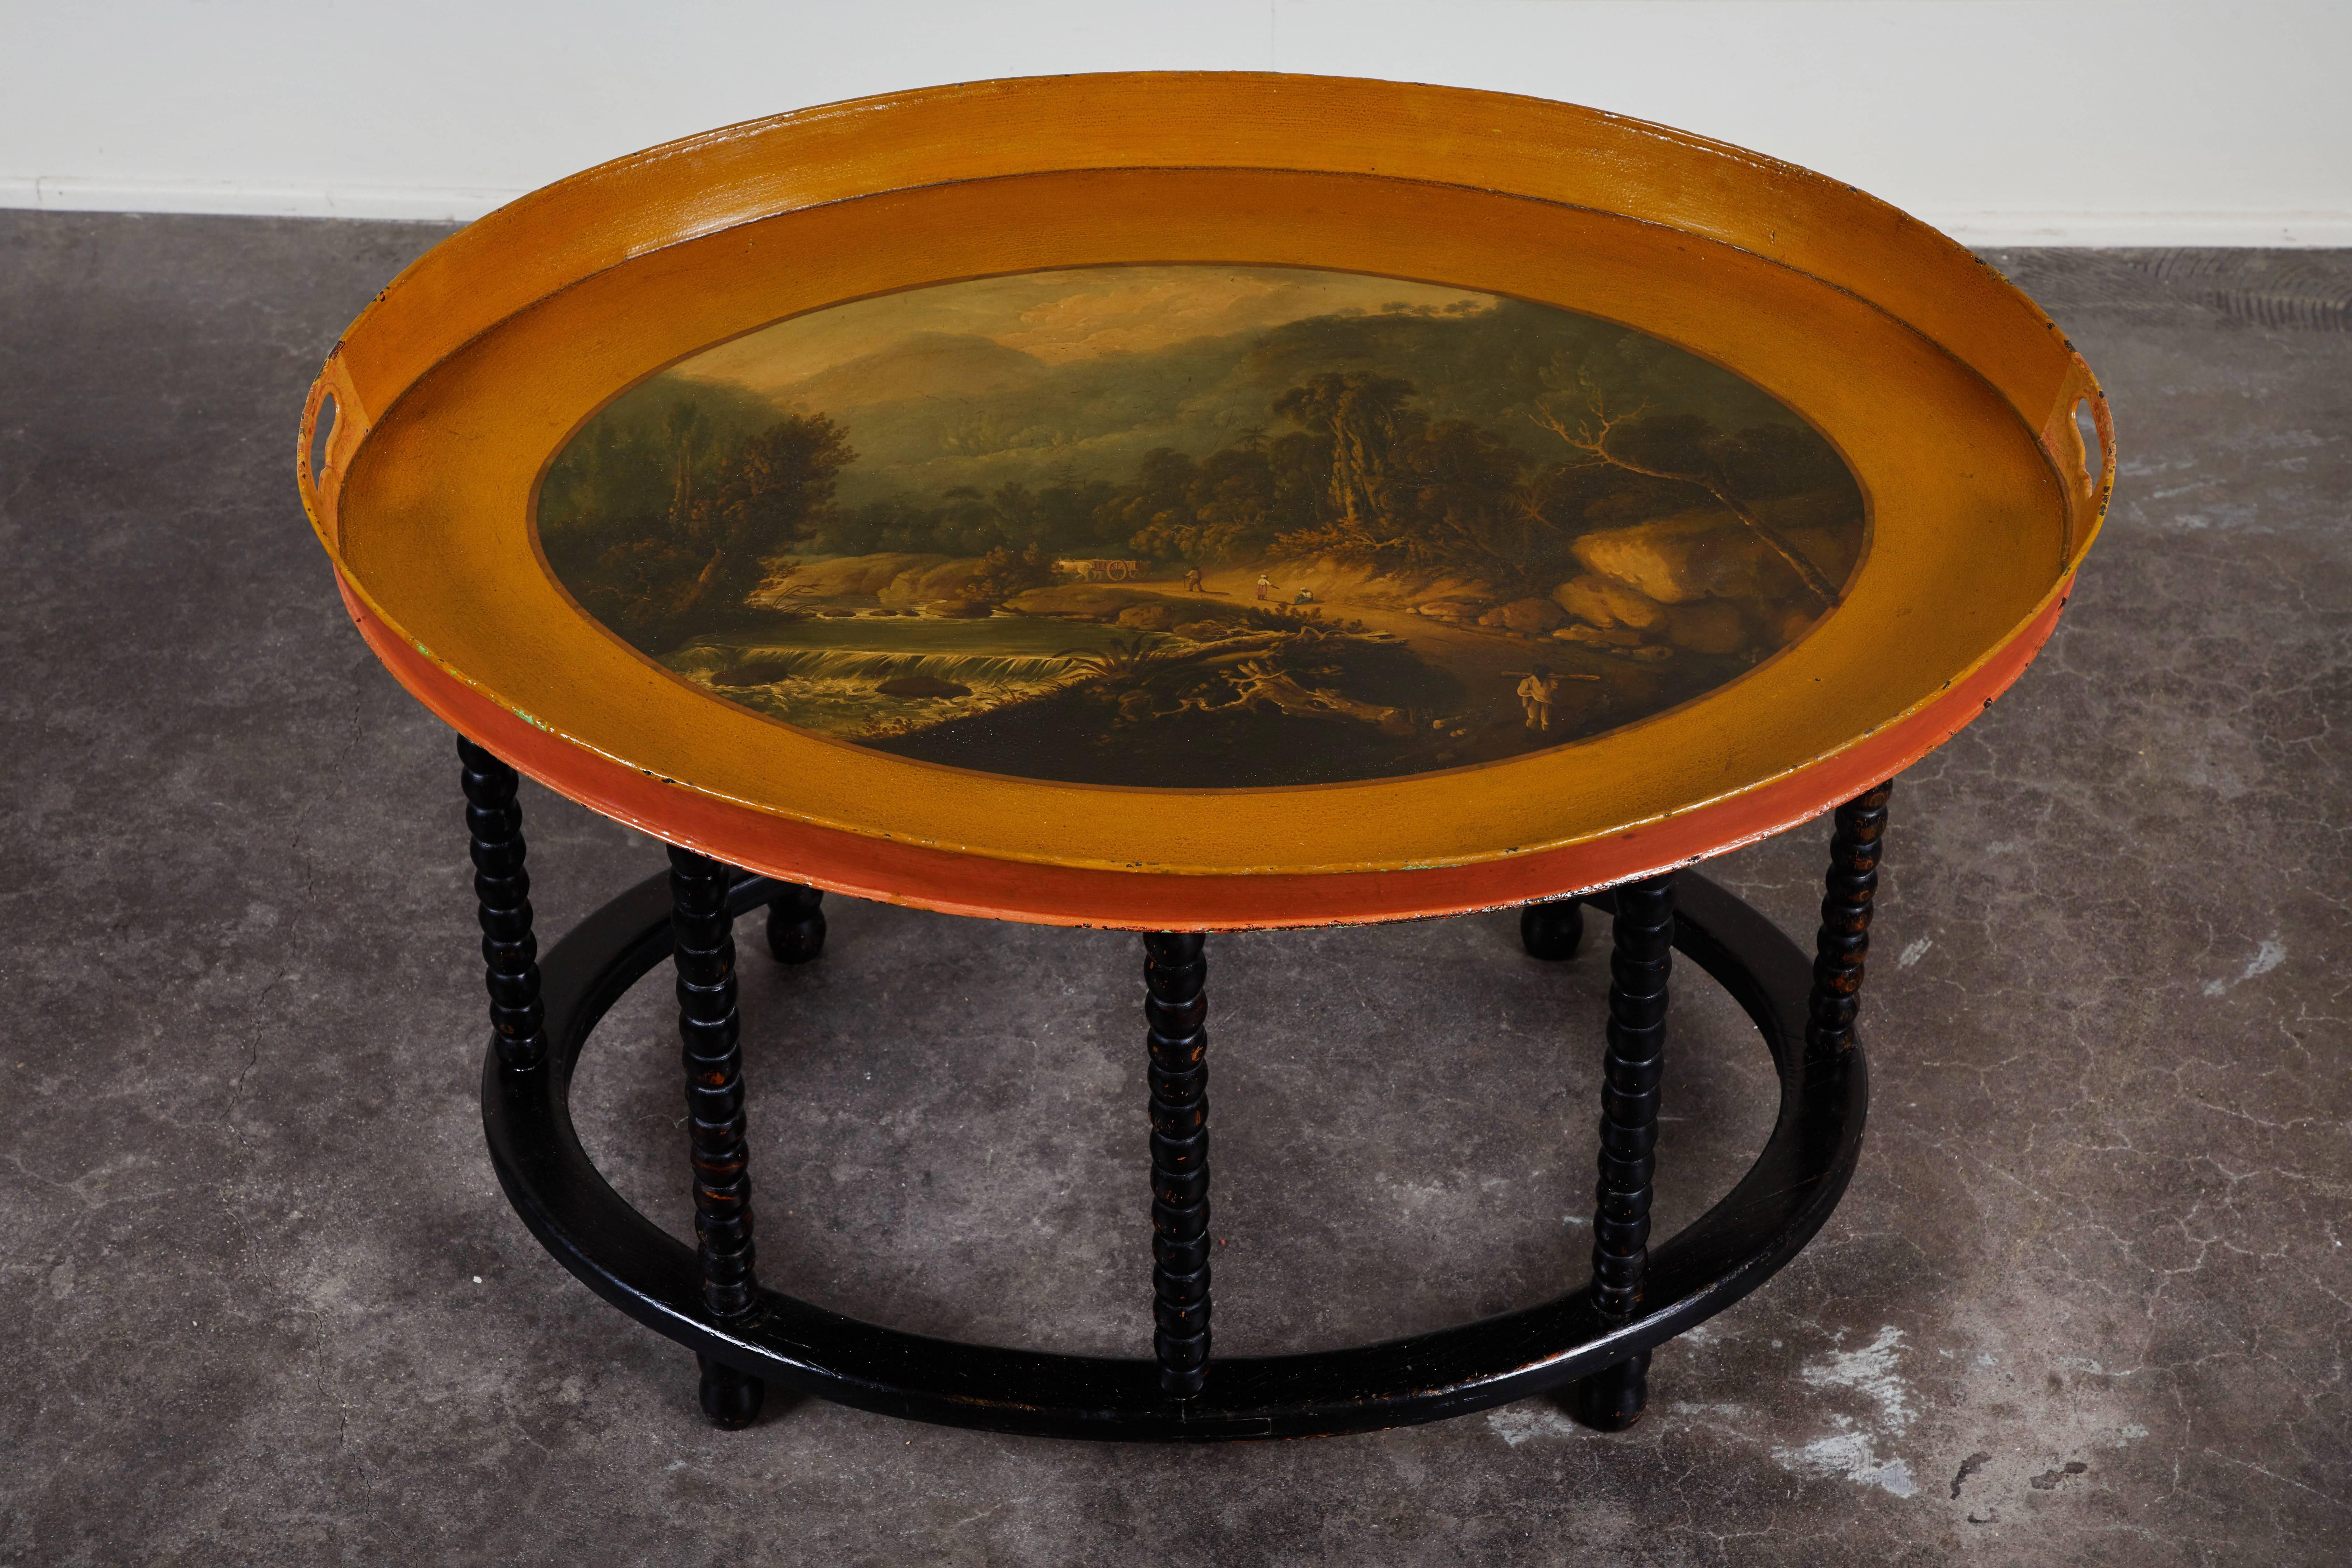 A Danish tole tray table, featuring a West Indies motif and a newer stand, circa 1835.  Stand features the ever-popular bobbin style legs in a gorgeous black, drawing attention to the colorful and intricately painted tray top.